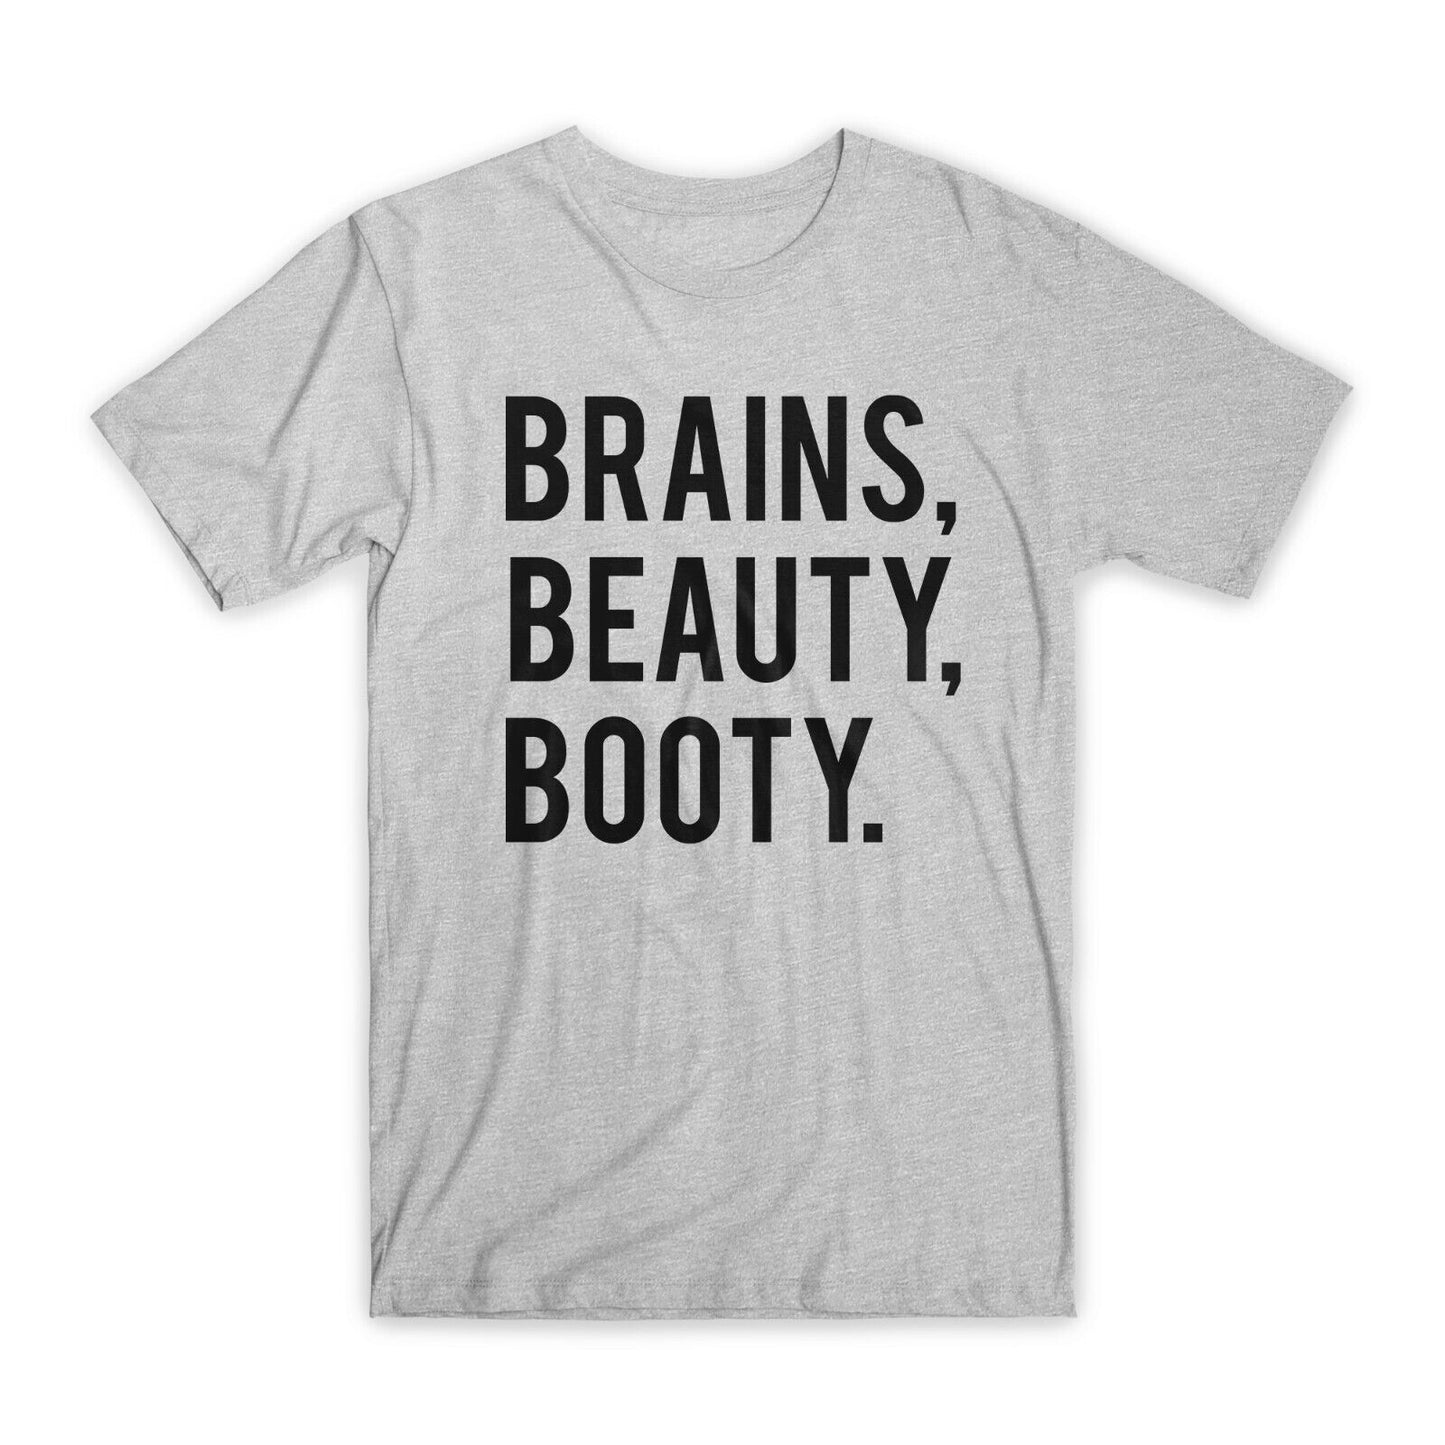 Brains Beauty Booty T-Shirt Premium Soft Cotton Crew Neck Funny Tees Gifts NEW